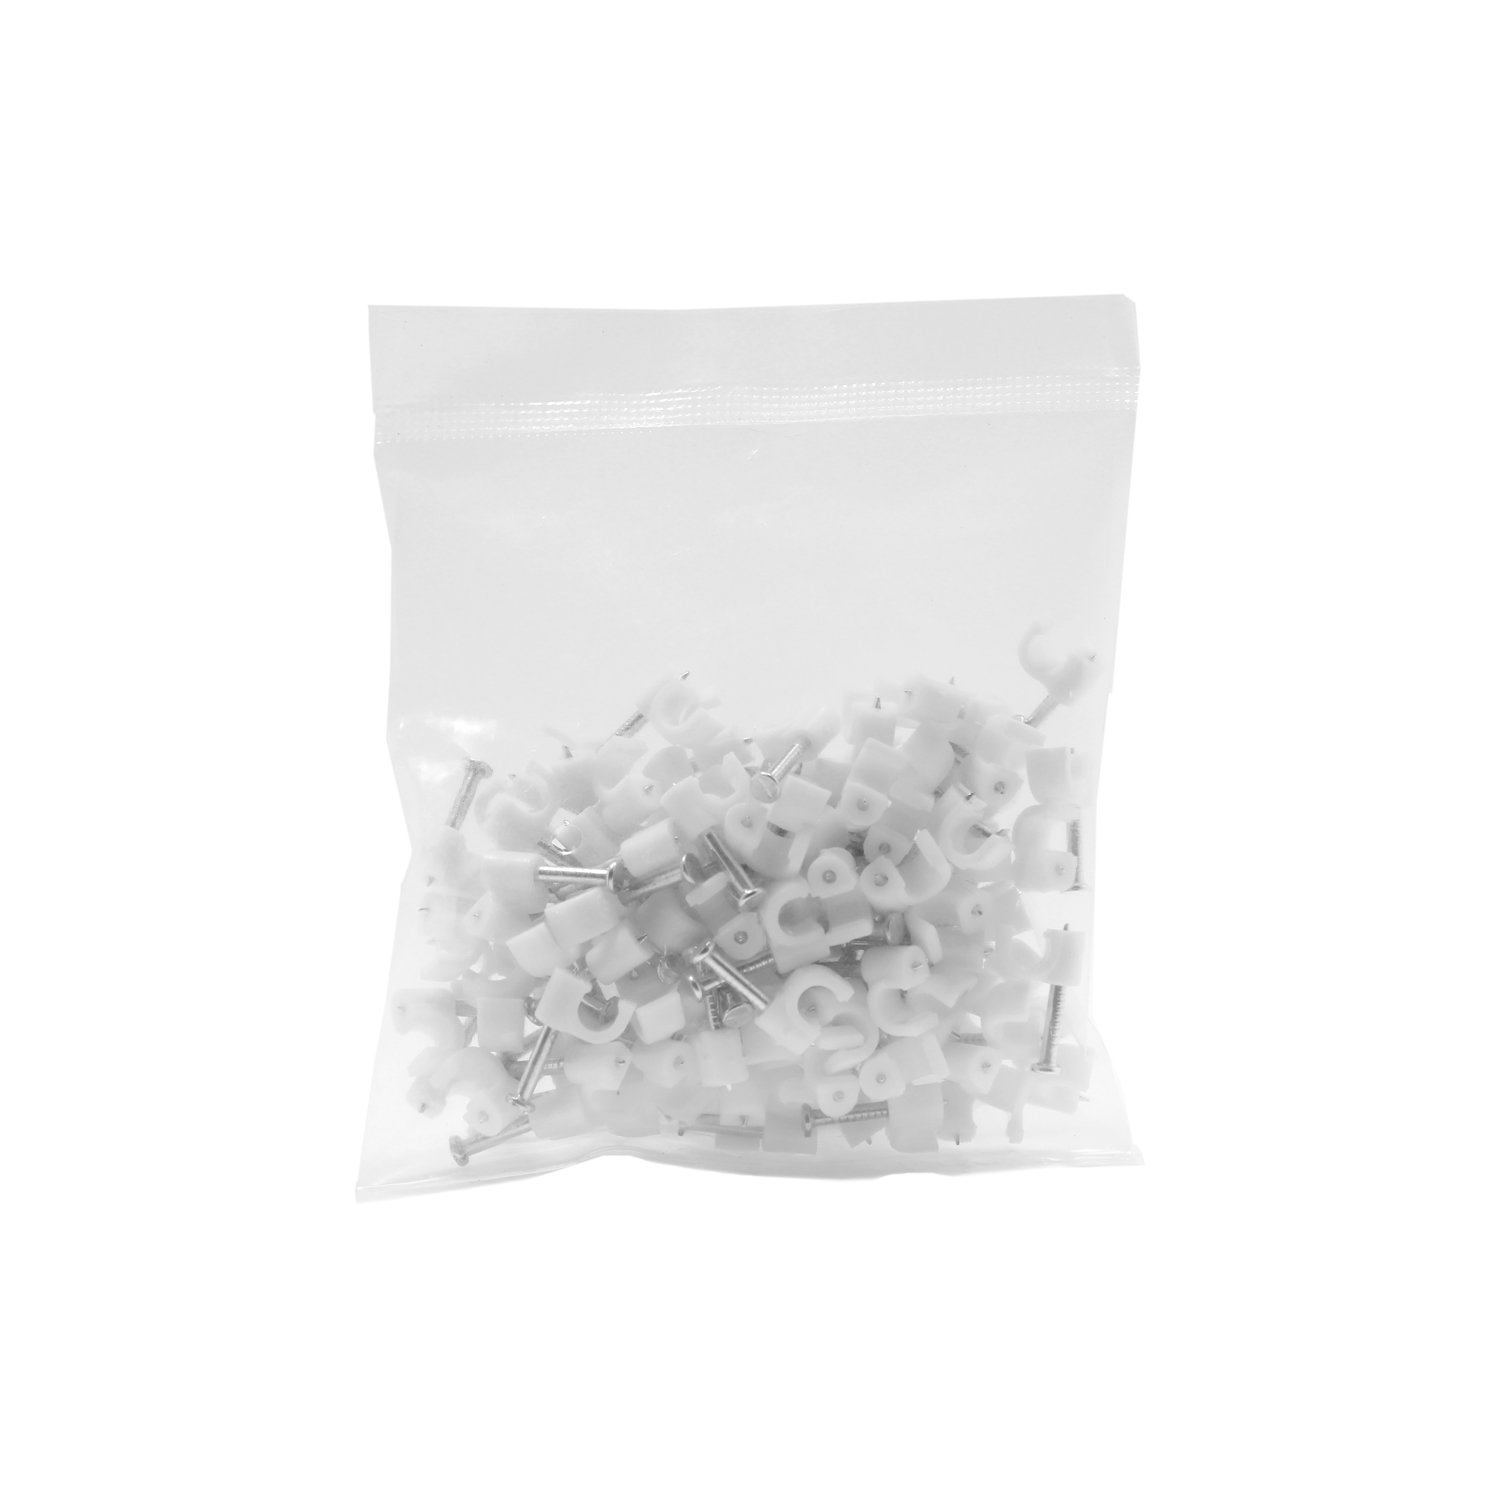 QualGear 4mm Cable Clips, White, 100 Pack, CC4-W-100-P